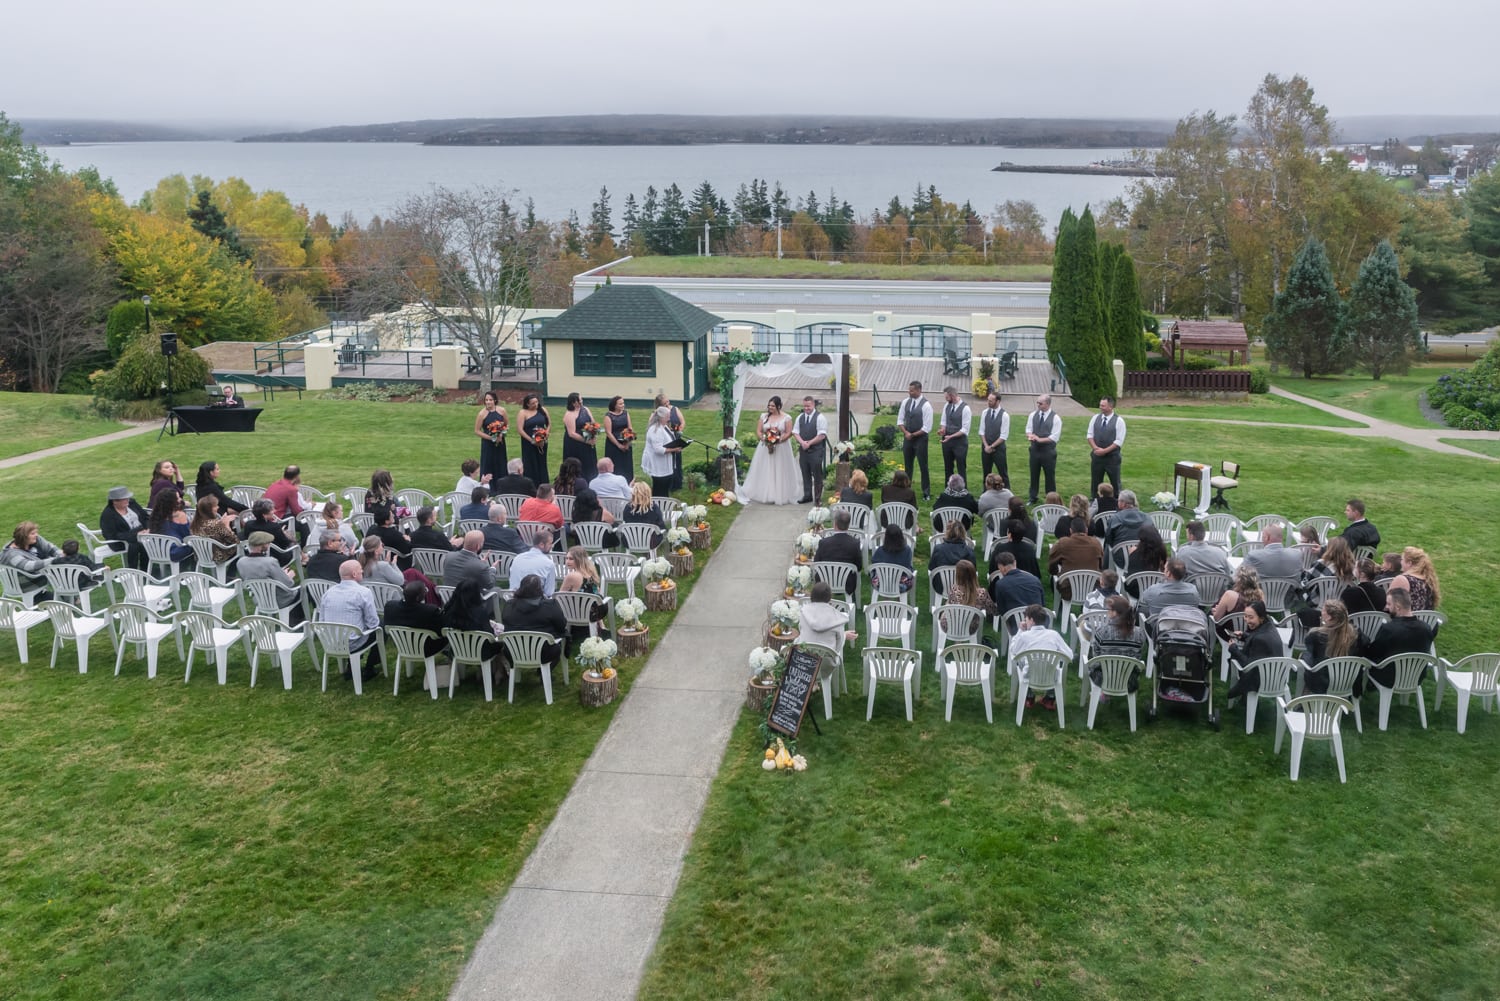 An aerial view of the bride and groom's wedding ceremony outside at Digby Pines.